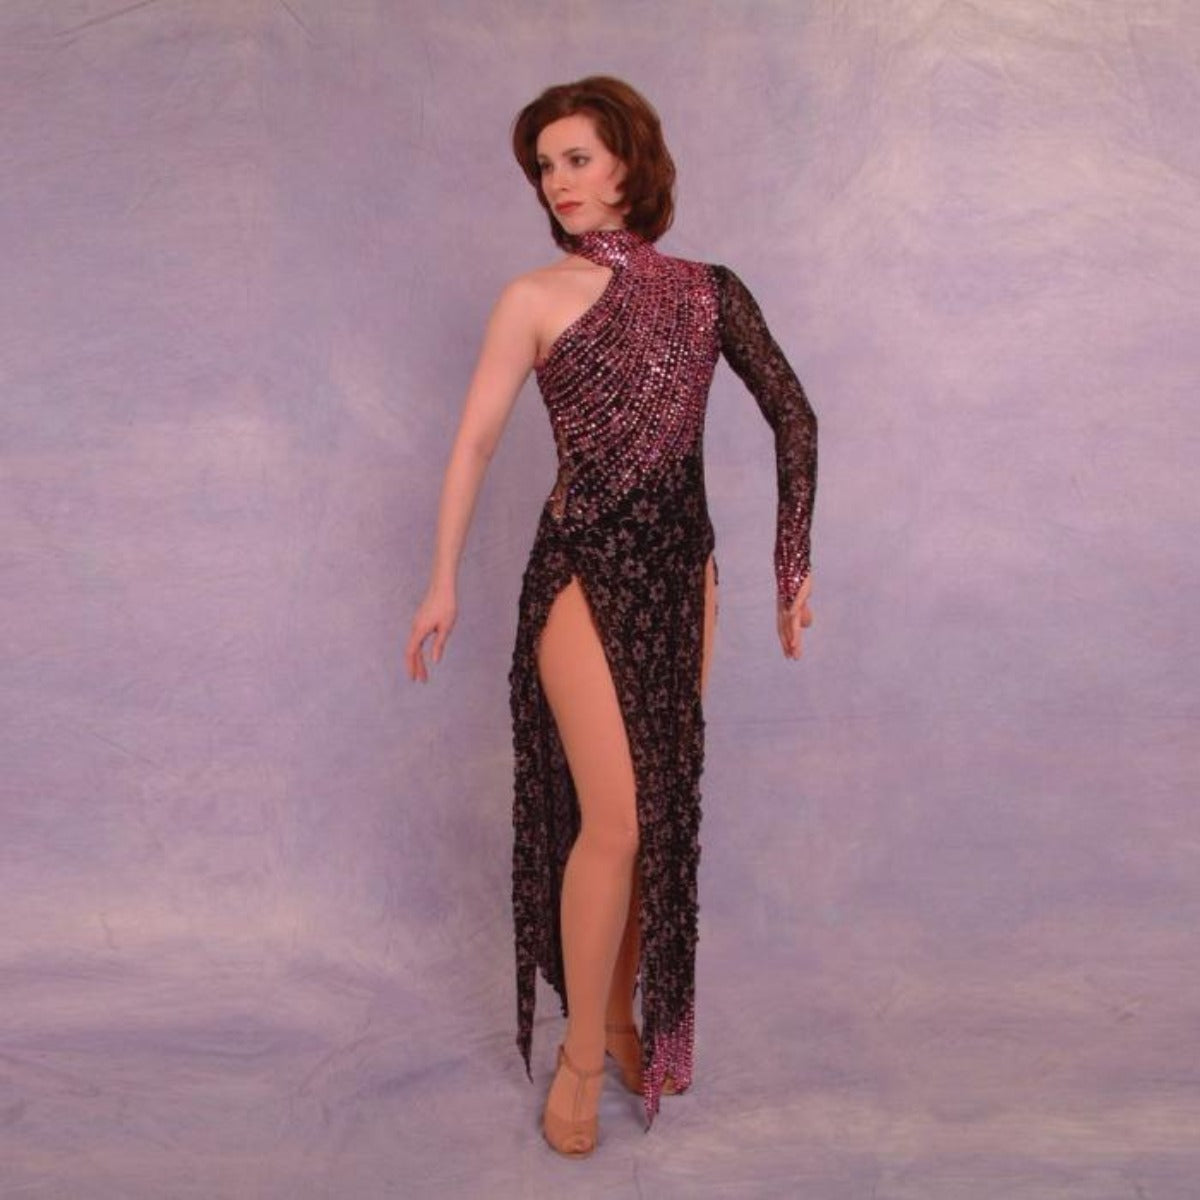 Crystal's Creations Stunning black long sleeve Latin/Rhythm dress was created in black & subtle pink stretch lace, & is embellished with over 25 gross of rose Swarovski rhinestones covering most of the bodice in a gorgeous wave pattern, featuring strap detailing on the back.